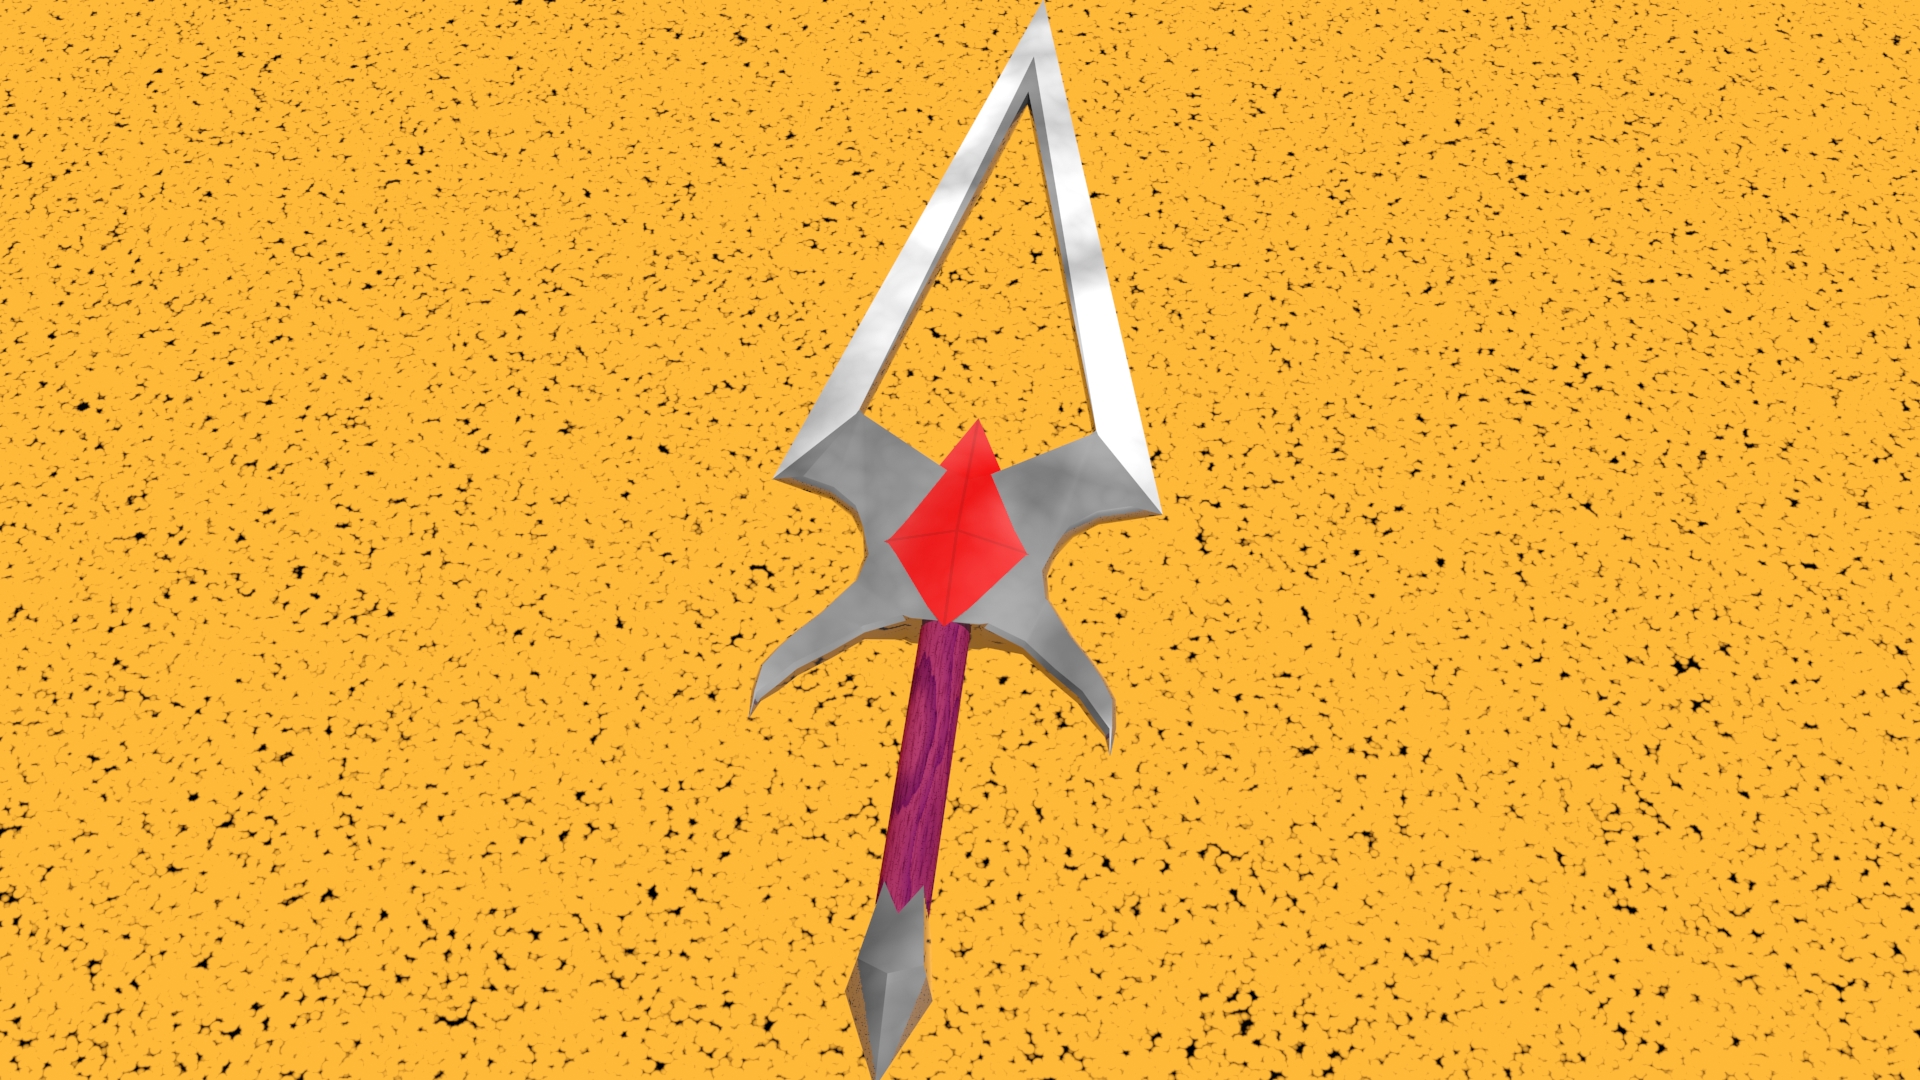 3D rendered stylized sword.